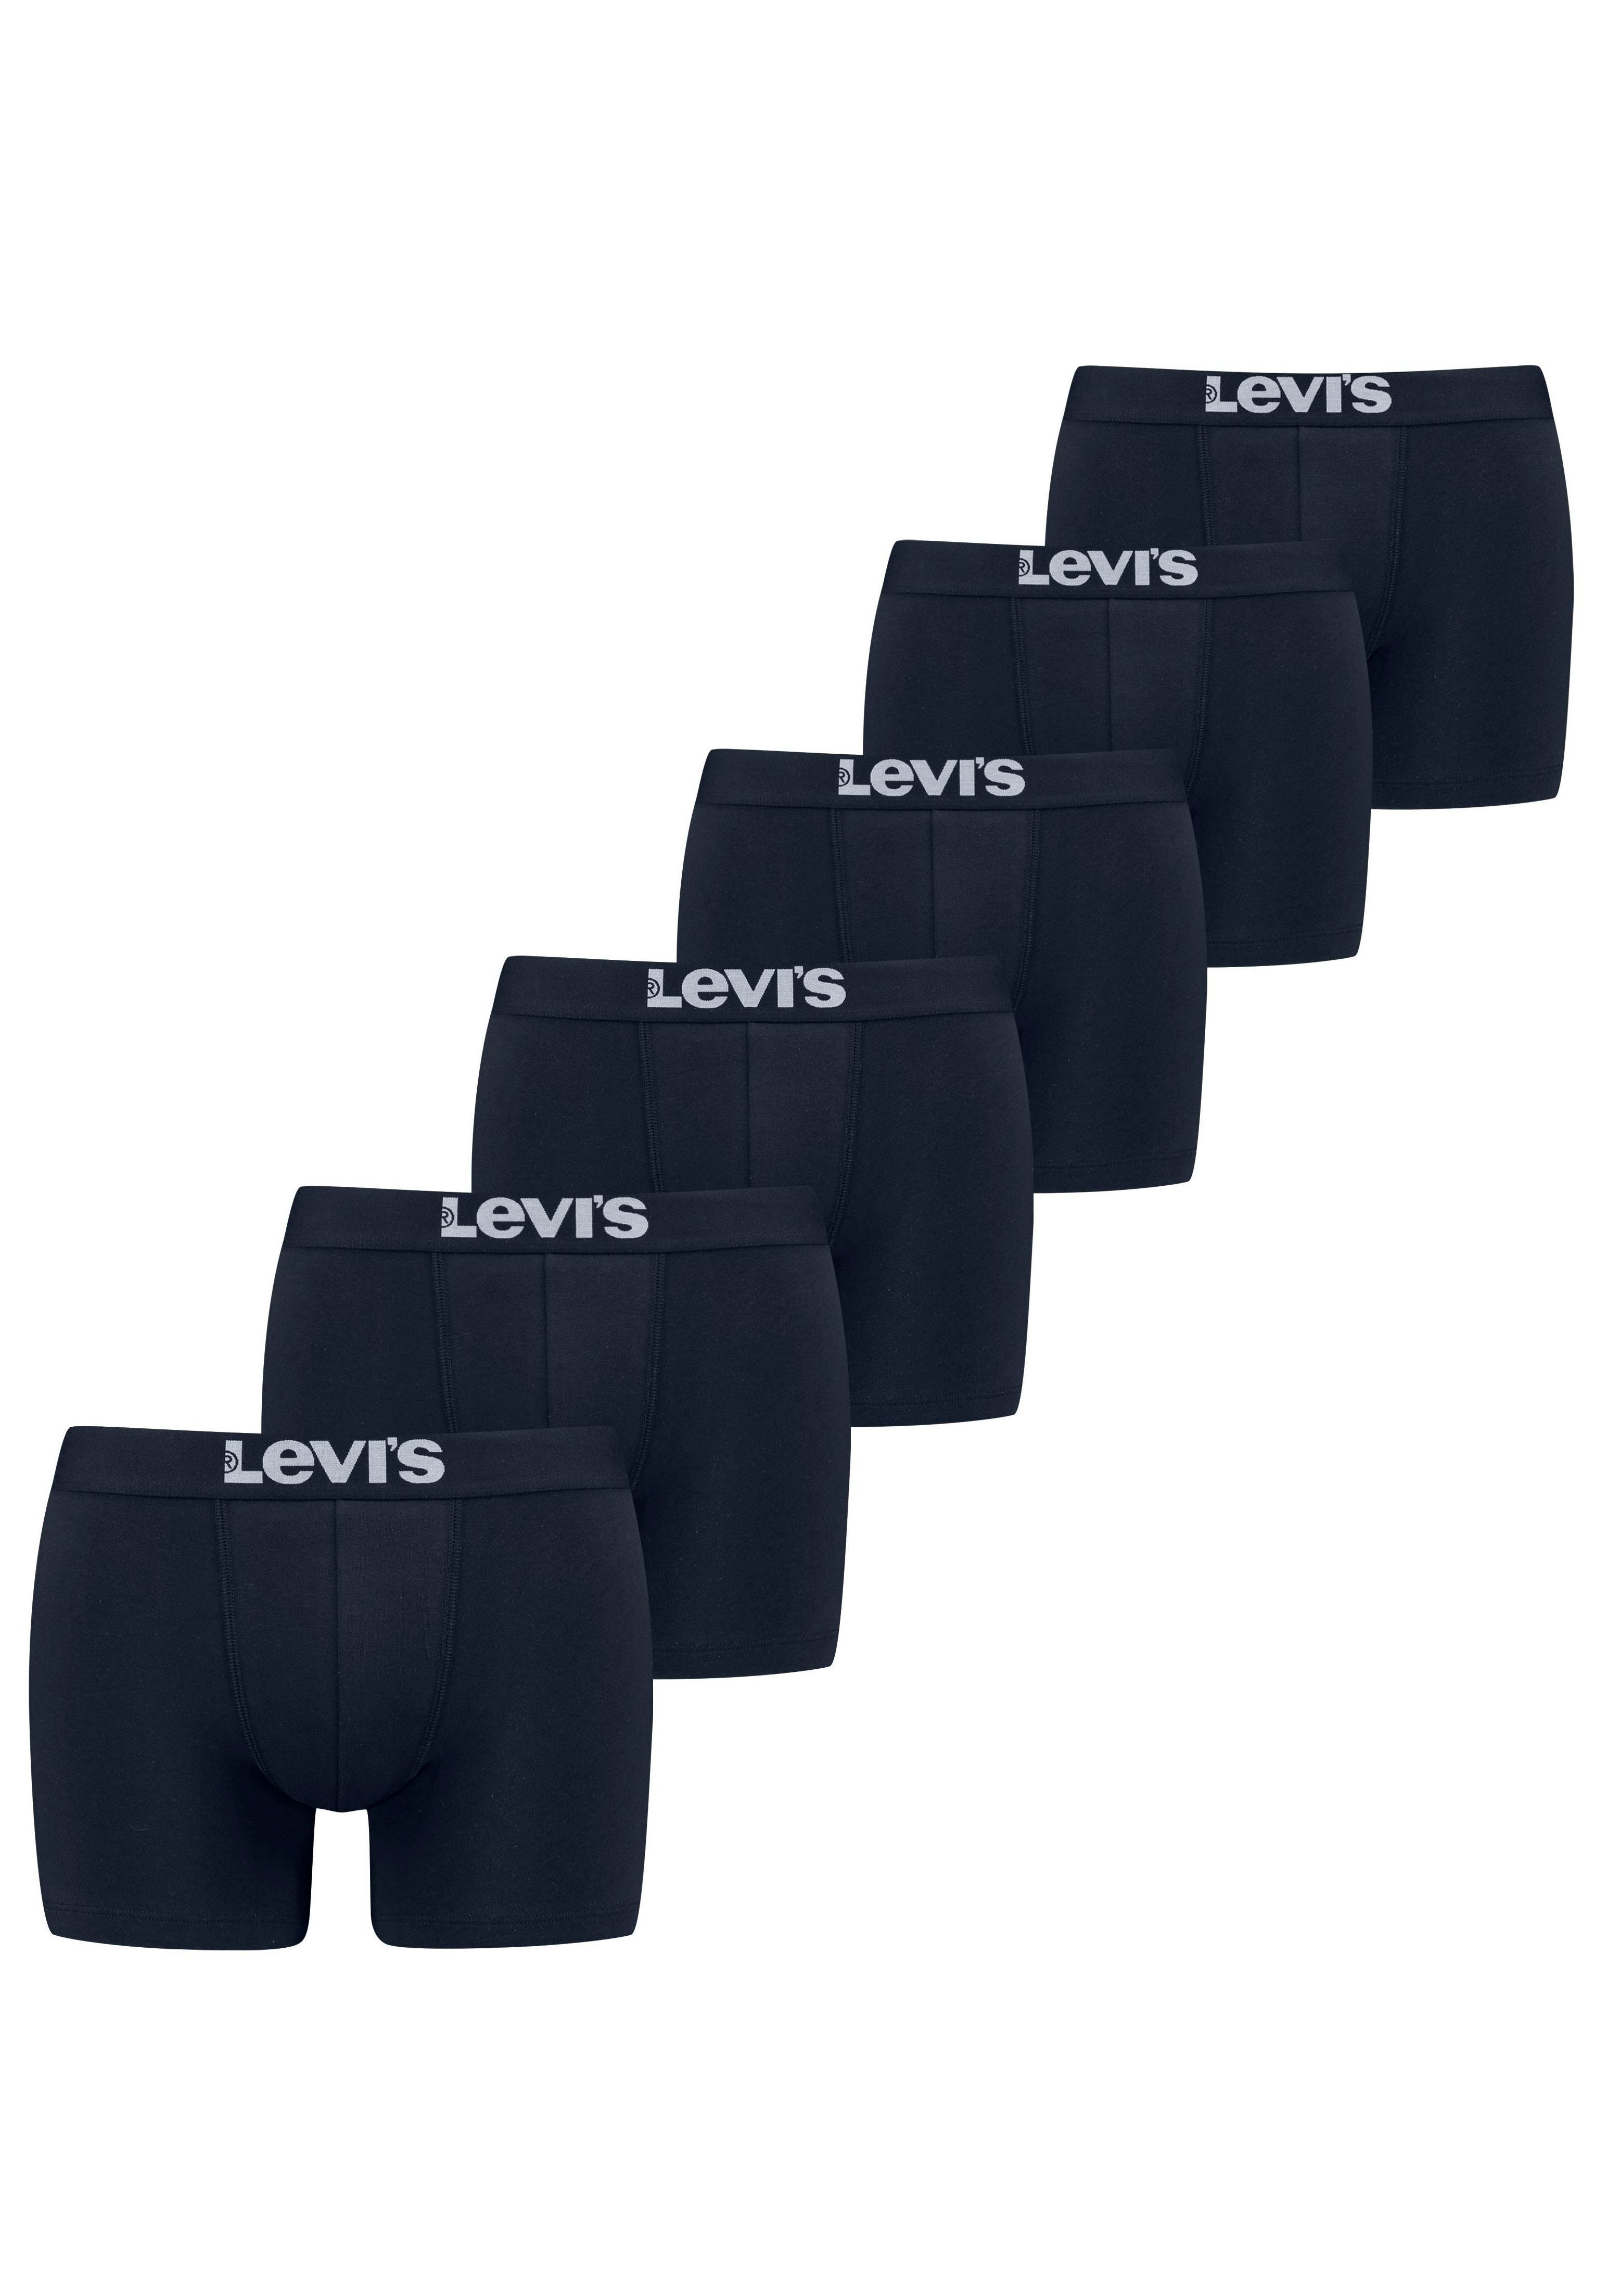 Levi's® Boxershorts (Packung, 6-St) LEVIS MEN SOLID BASIC BOXER BRIEF ORG CO 6P ECOM navy